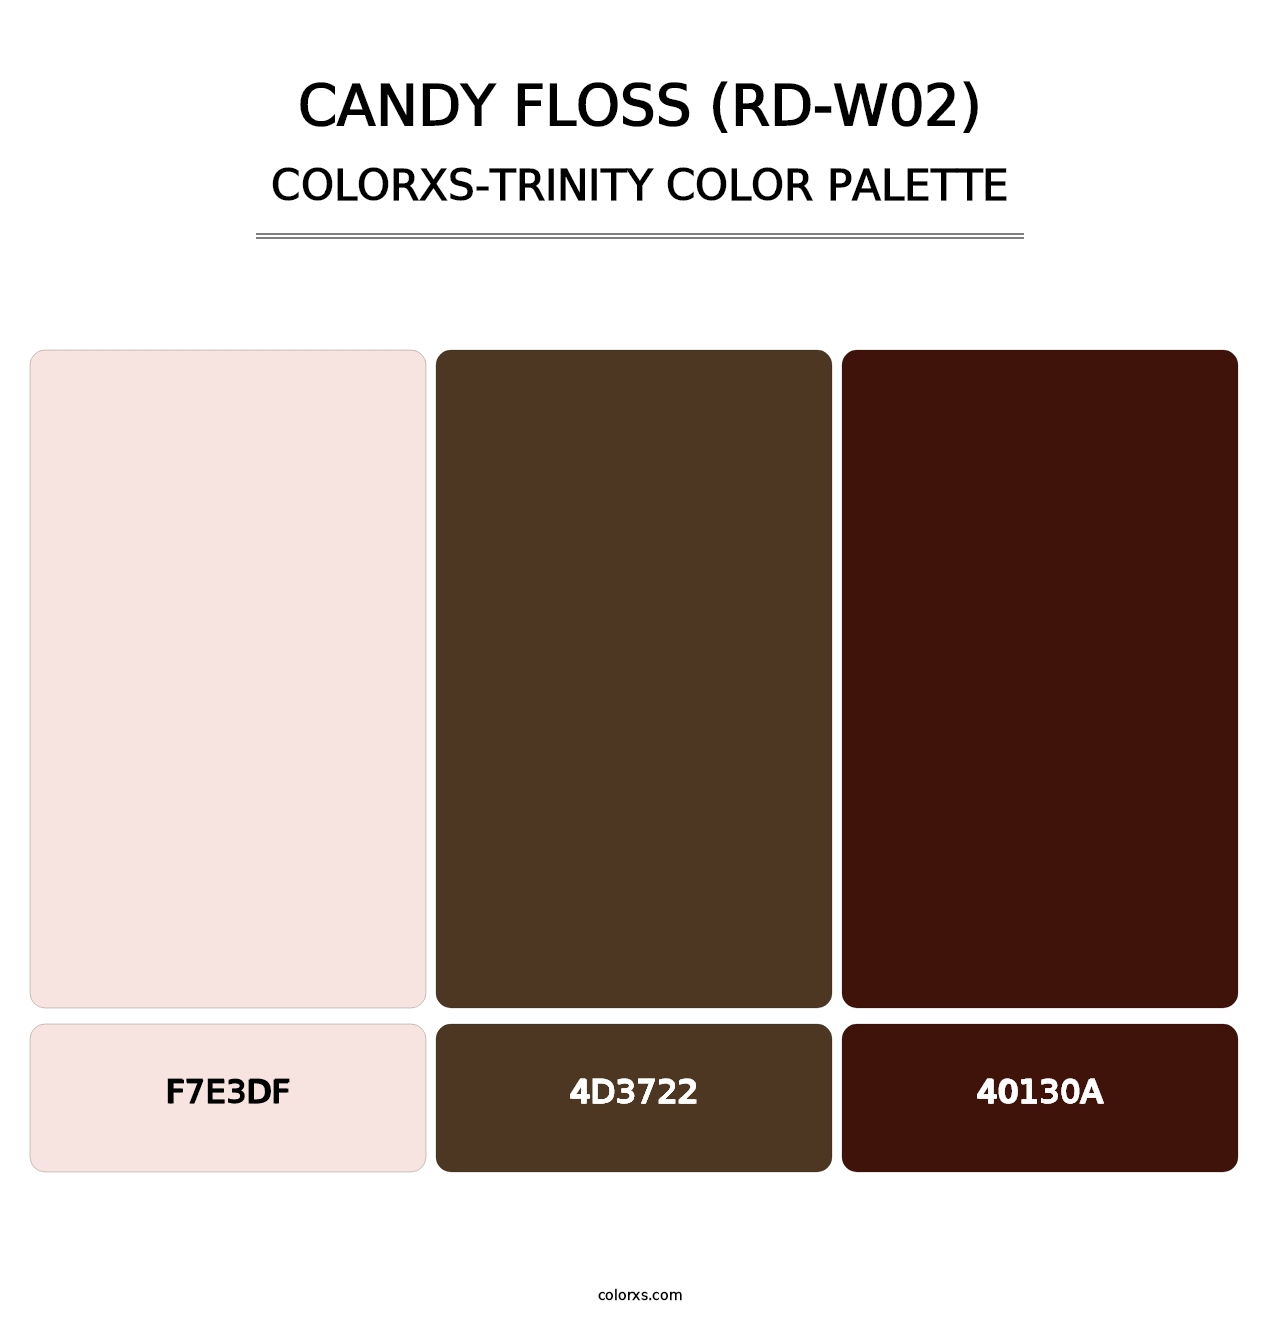 Candy Floss (RD-W02) - Colorxs Trinity Palette